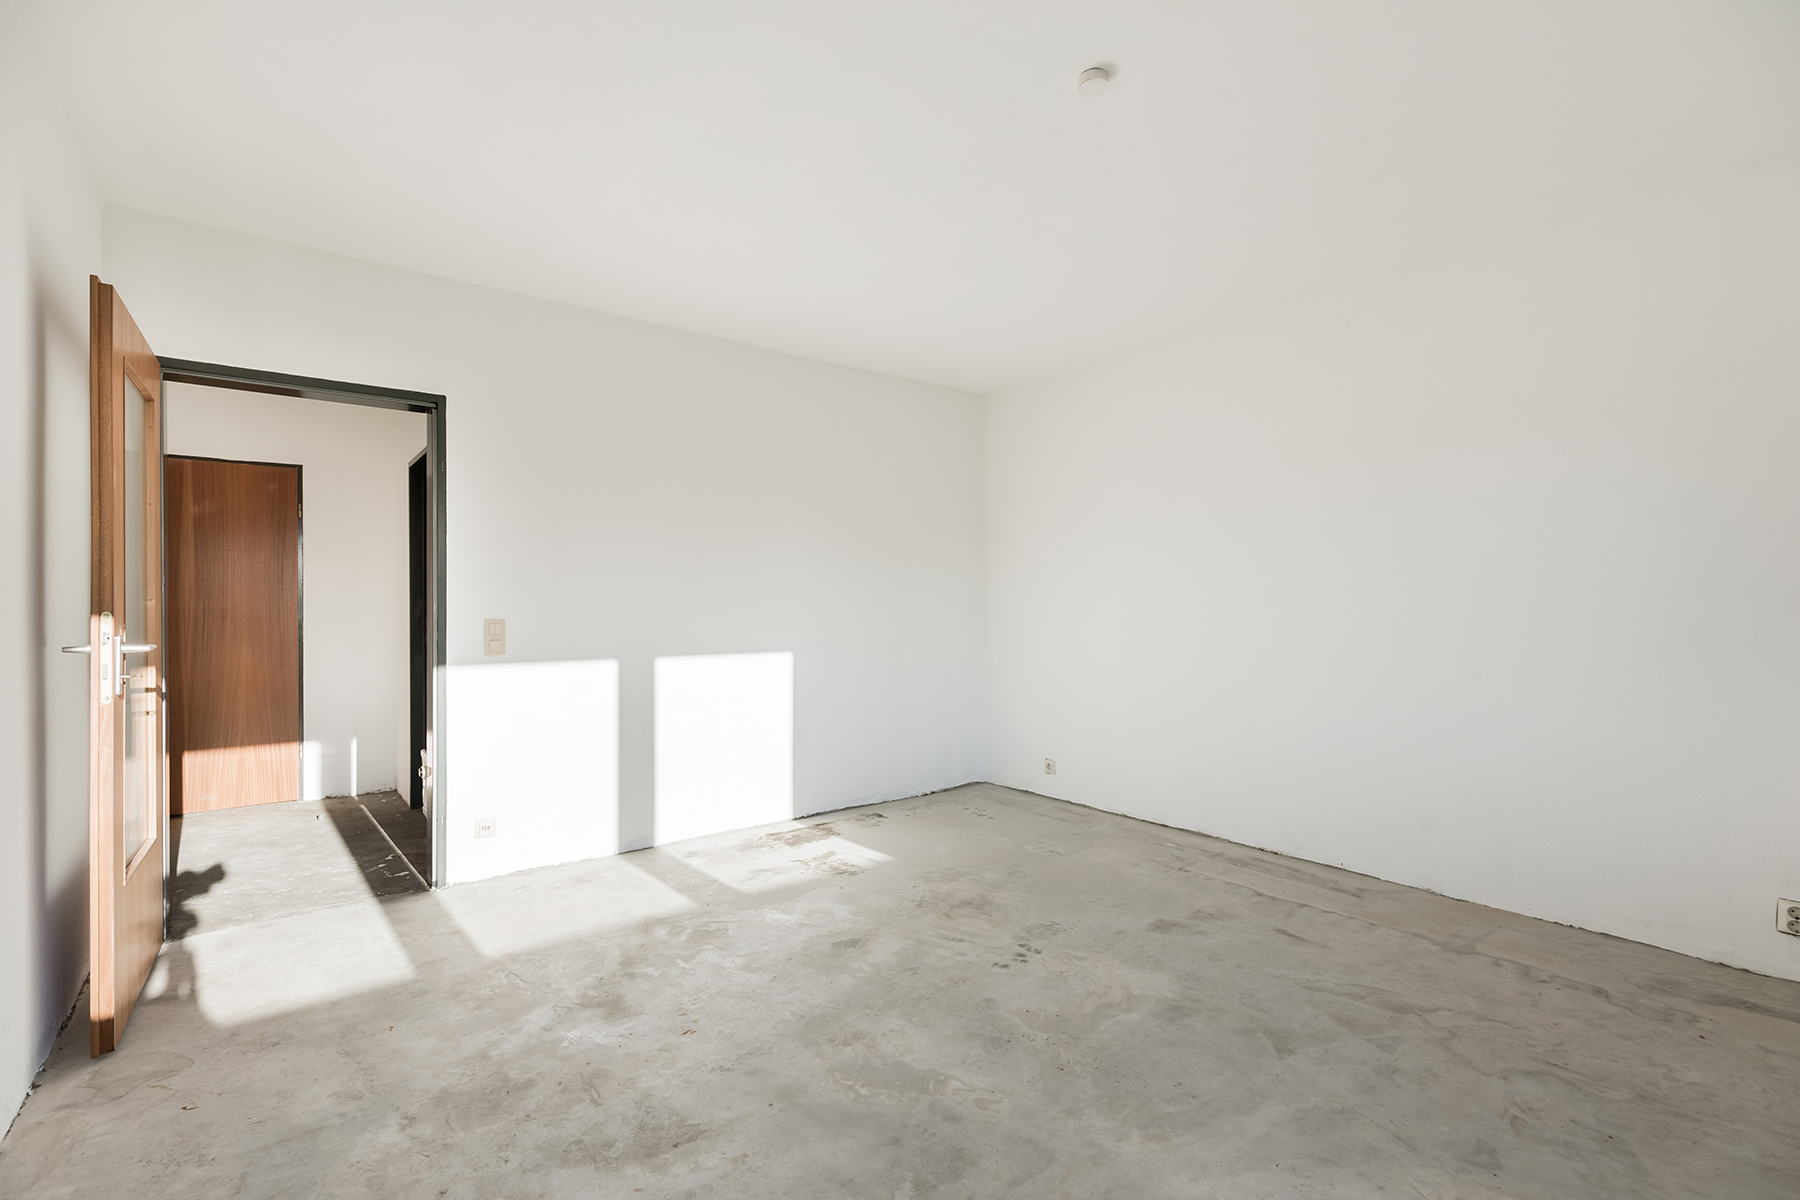 An unfurnished apartment interior